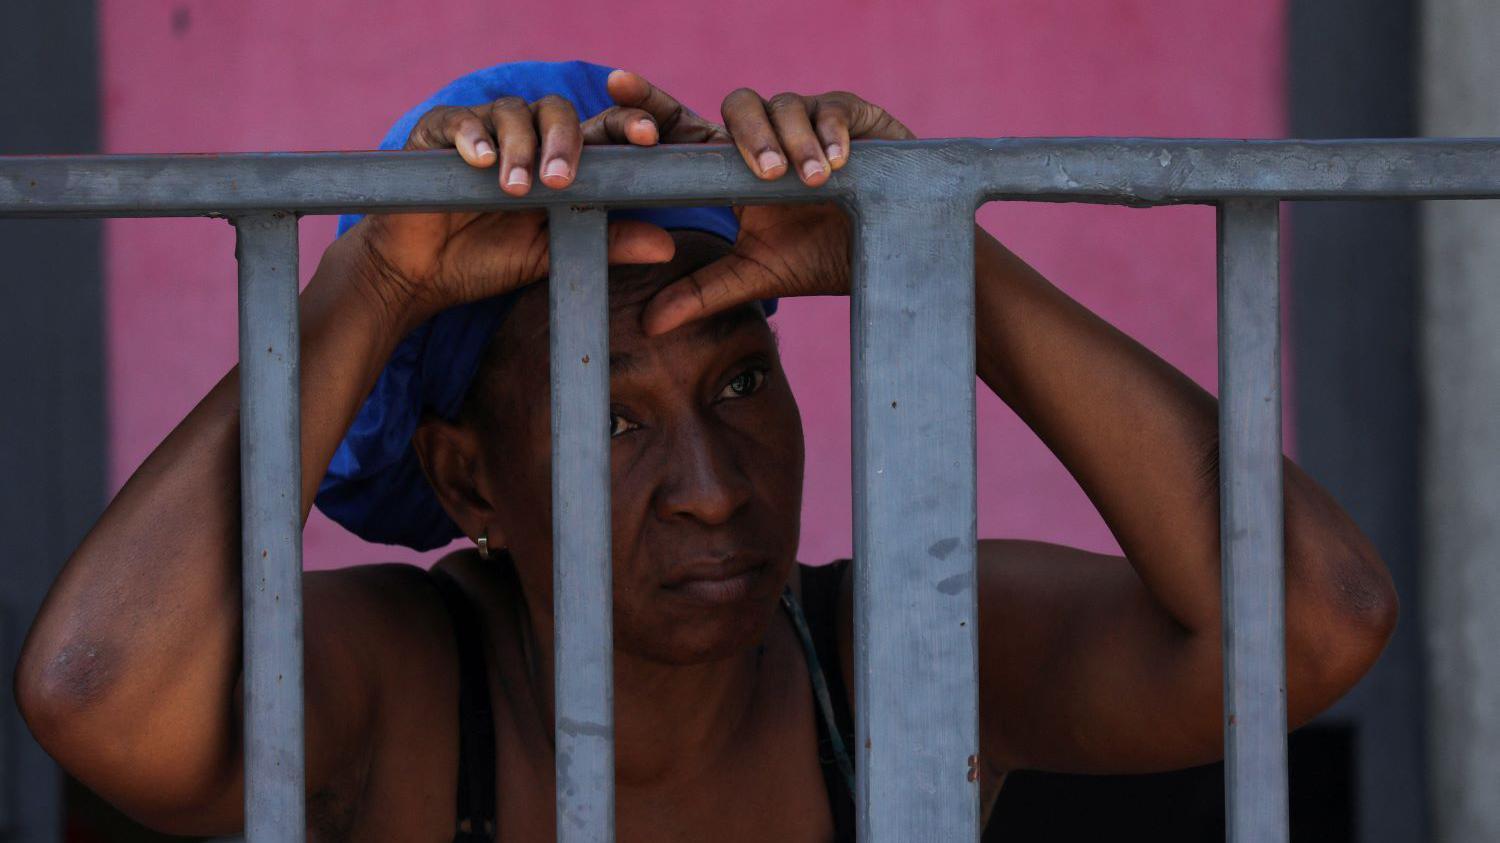 A woman looks mournfully out through the bars of a metal gate around a school building